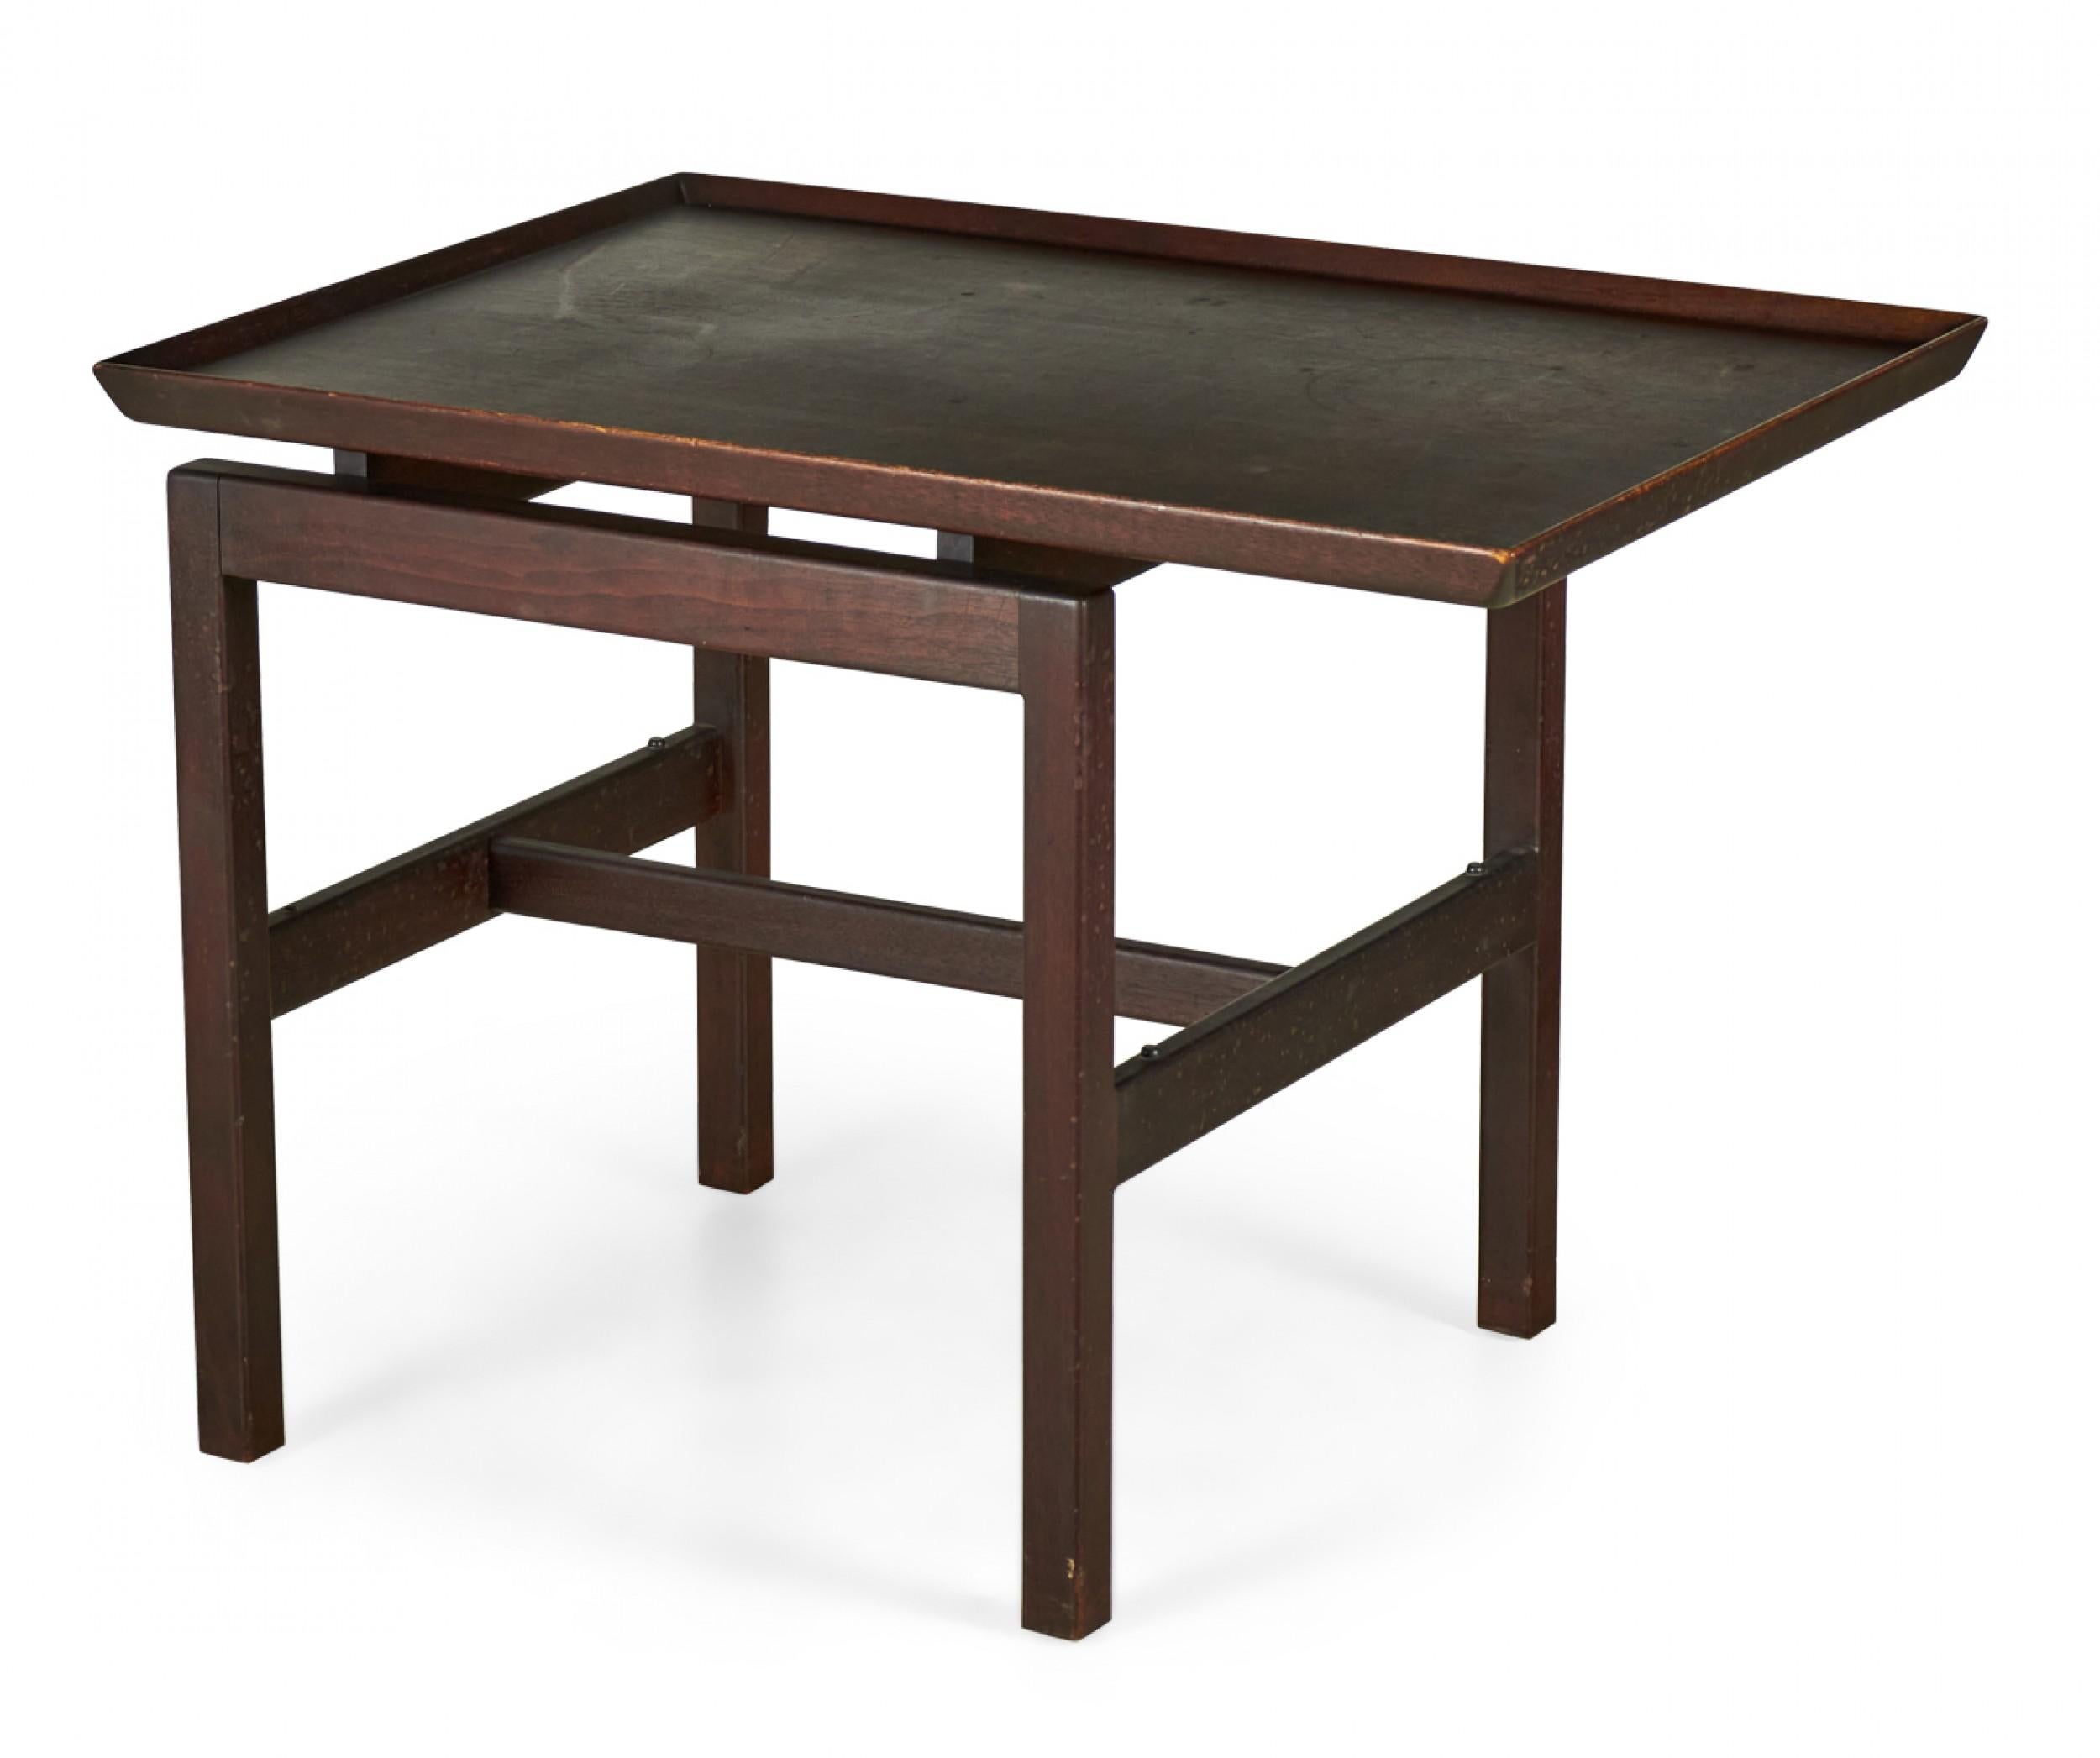 Danish Mid-Century dark stained walnut cantilever side / end table with a rectangular off-center tabletop with shallow gallery supported by a walnut stretcher base. (JENS RISOM)(Available in lighter finish: DUF0103)
